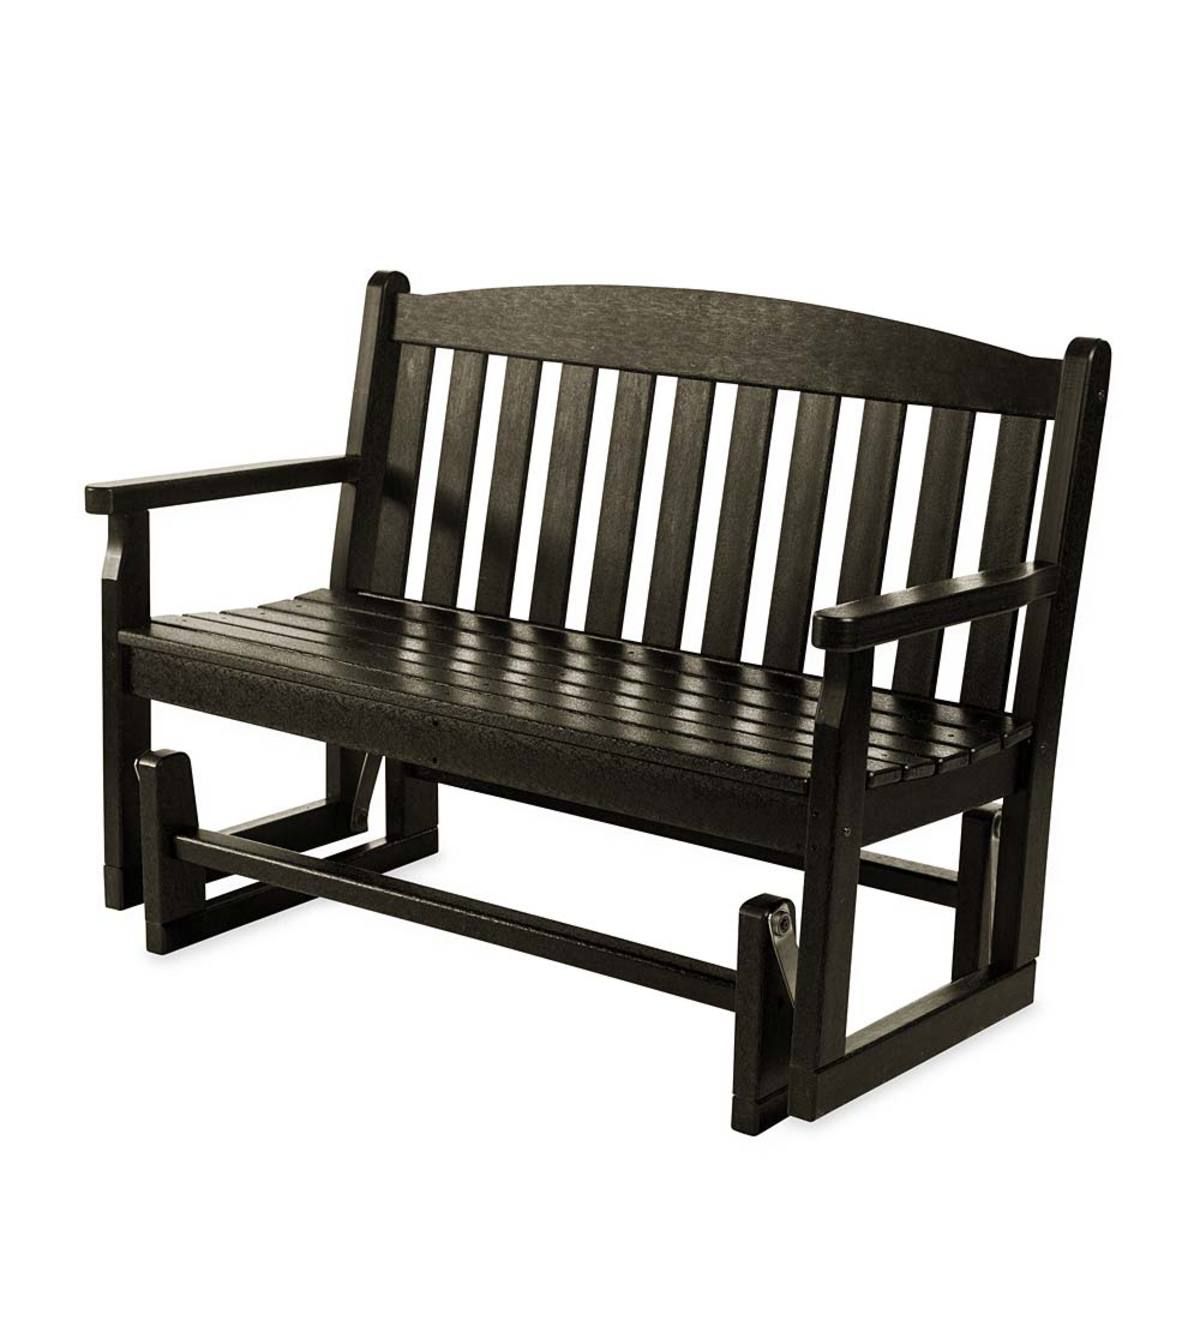 Polywood Outdoor Glider Bench – Black | Plowhearth Pertaining To Hardwood Porch Glider Benches (View 13 of 25)